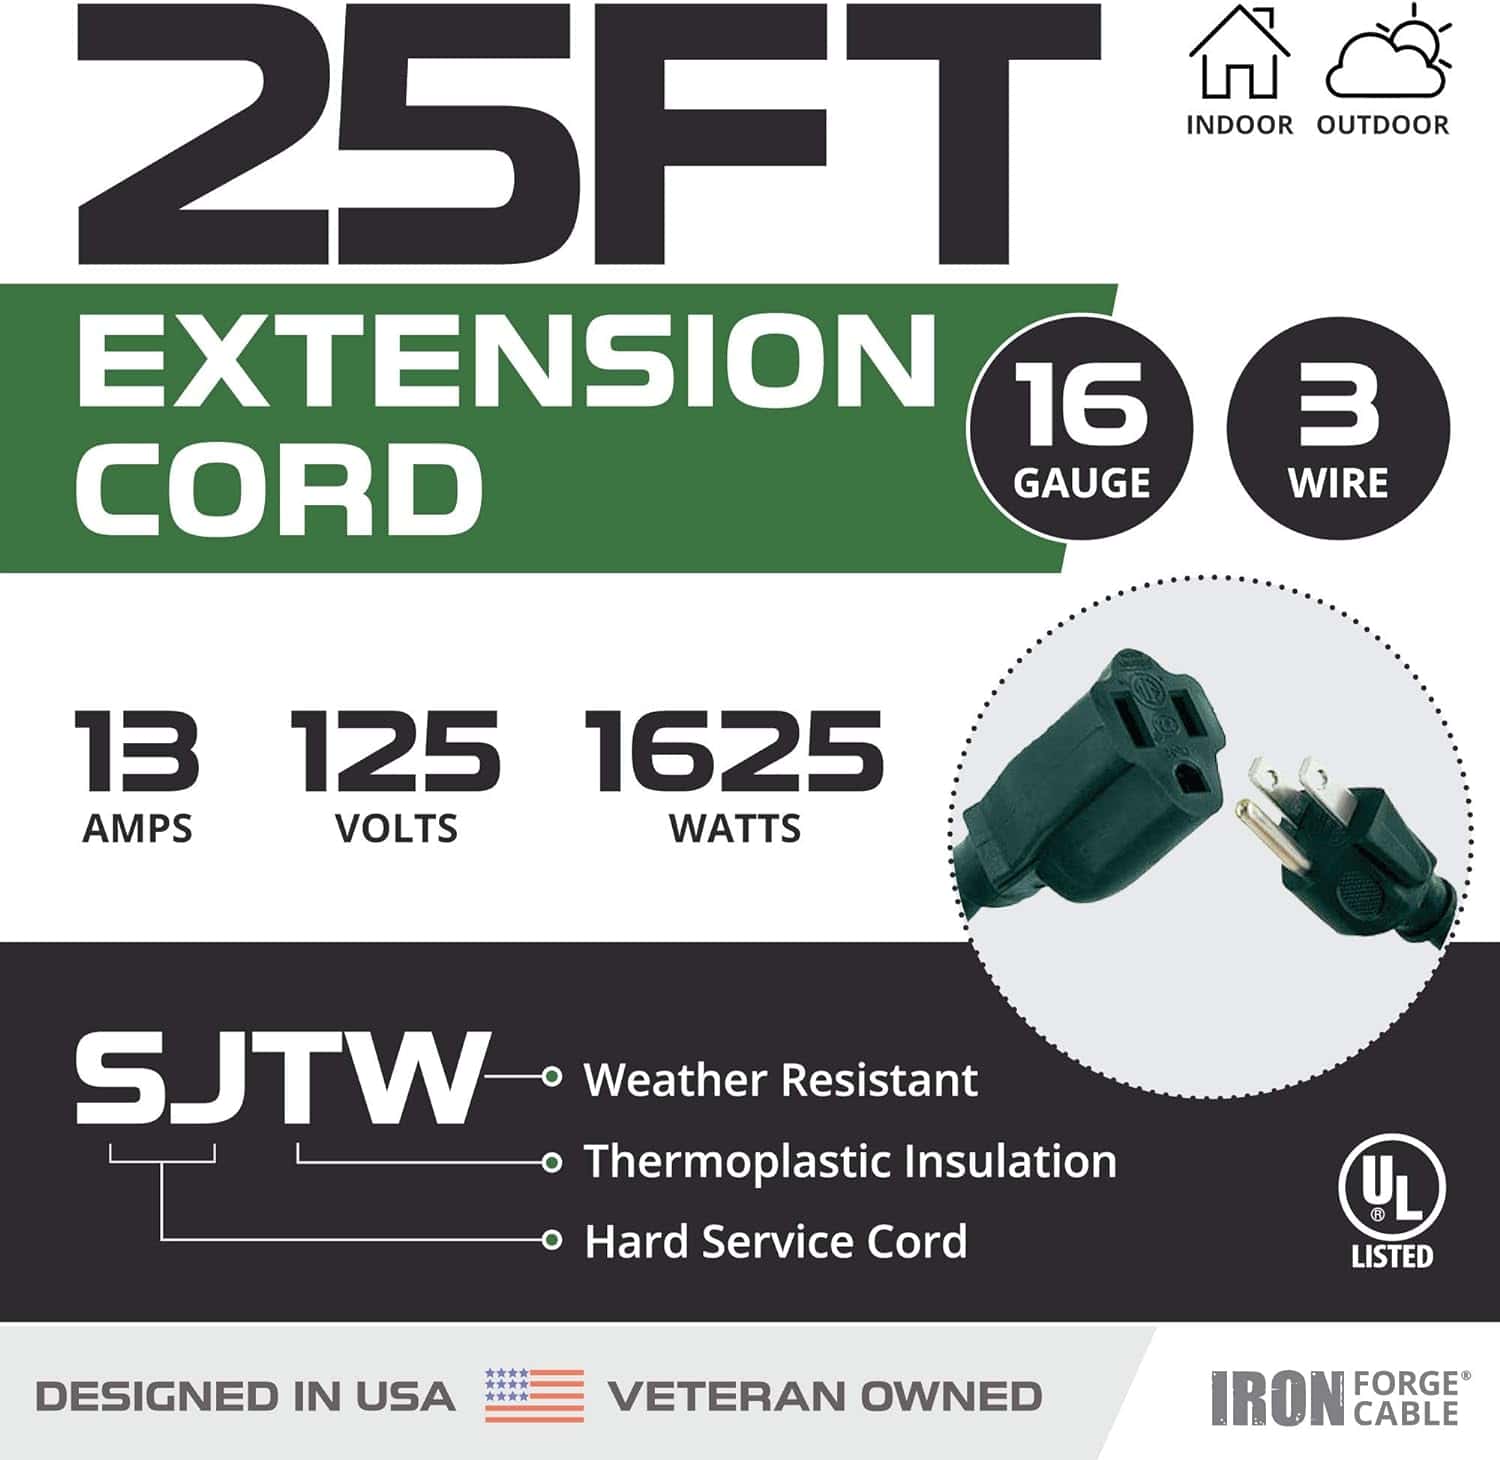 Iron-Forge-Cable-Green-Outdoor-Extension-Cord-25-Ft-16-3-Green-25-Foot-Extension-Cord-Indoor-Outdoor-Use-3-Prong-Weatherproof-Jacket-Extension-Cord